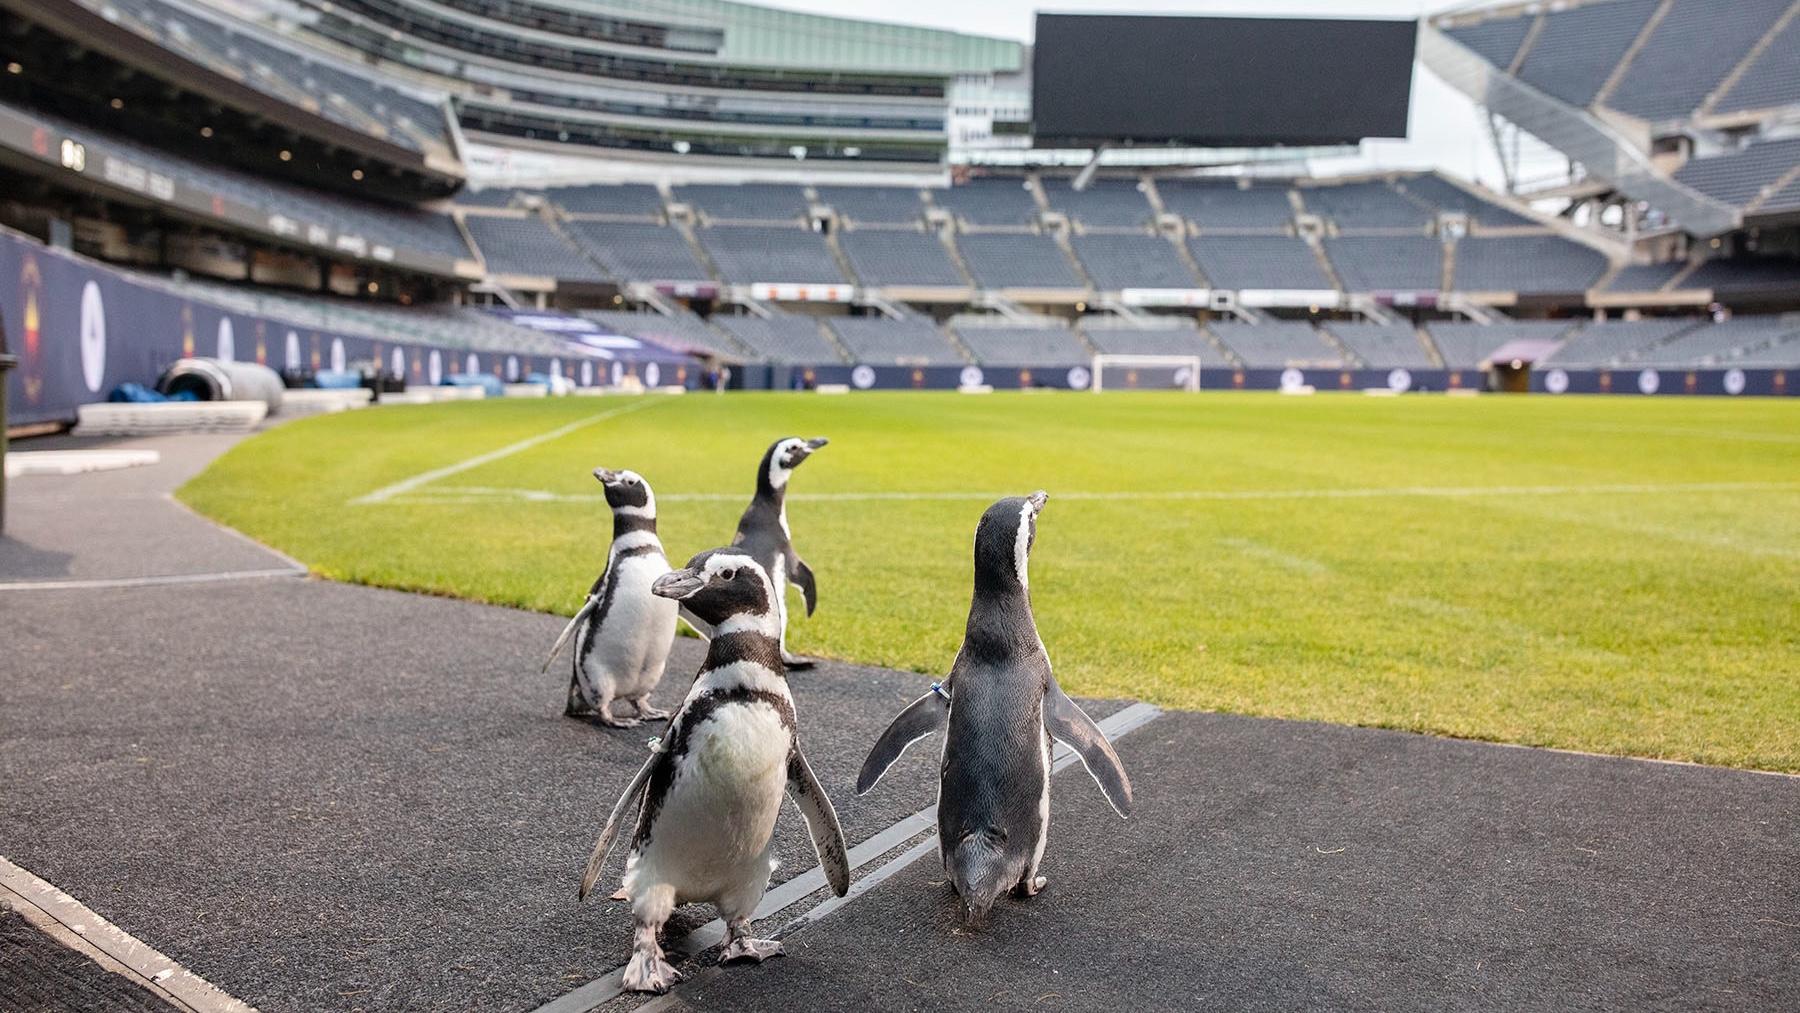 Penguins from the Shedd Aquarium recently paid a visit to Soldier Field. (Brenna Hernandez / Shedd Aquarium)